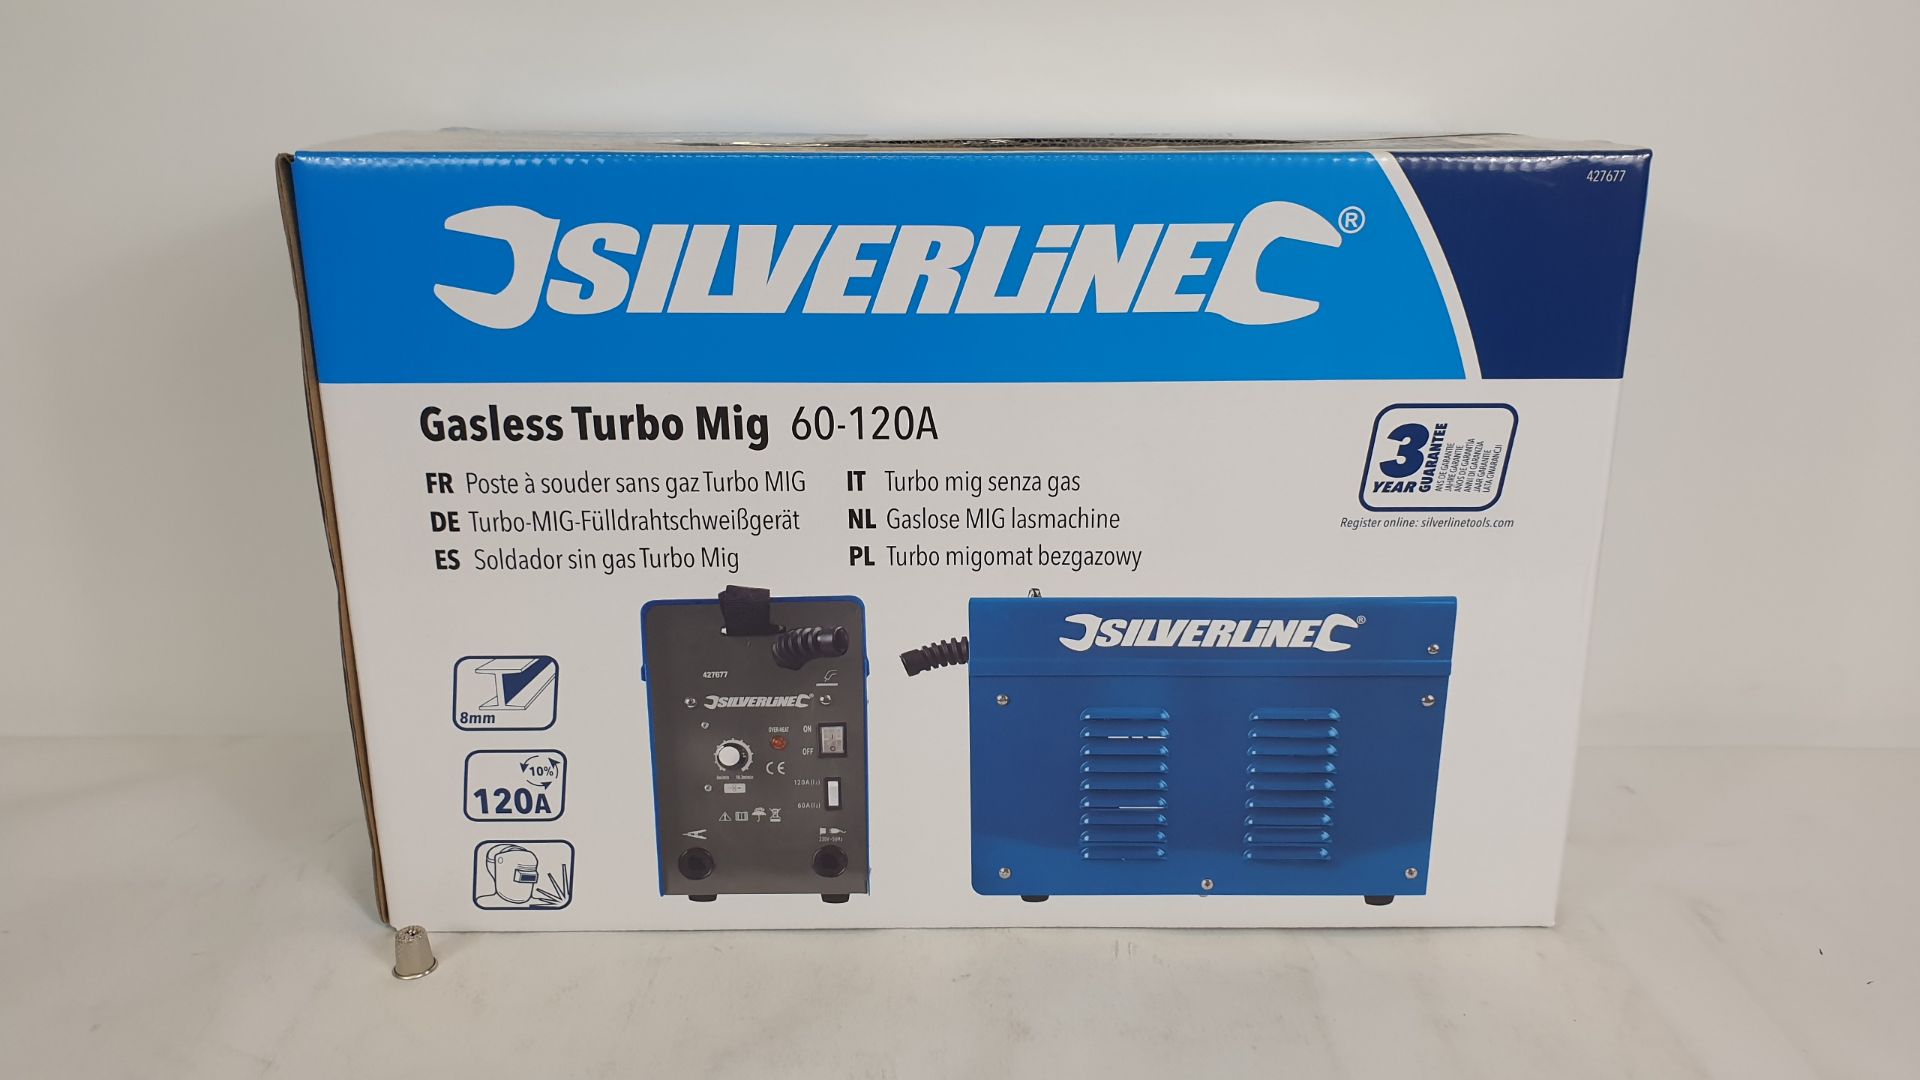 (LOT FOR THURSDAY 28TH MAY AUCTION) BRAND NEW BOXED SILVERLINE GASLESS TURBO MIG WELDING SET 60 -